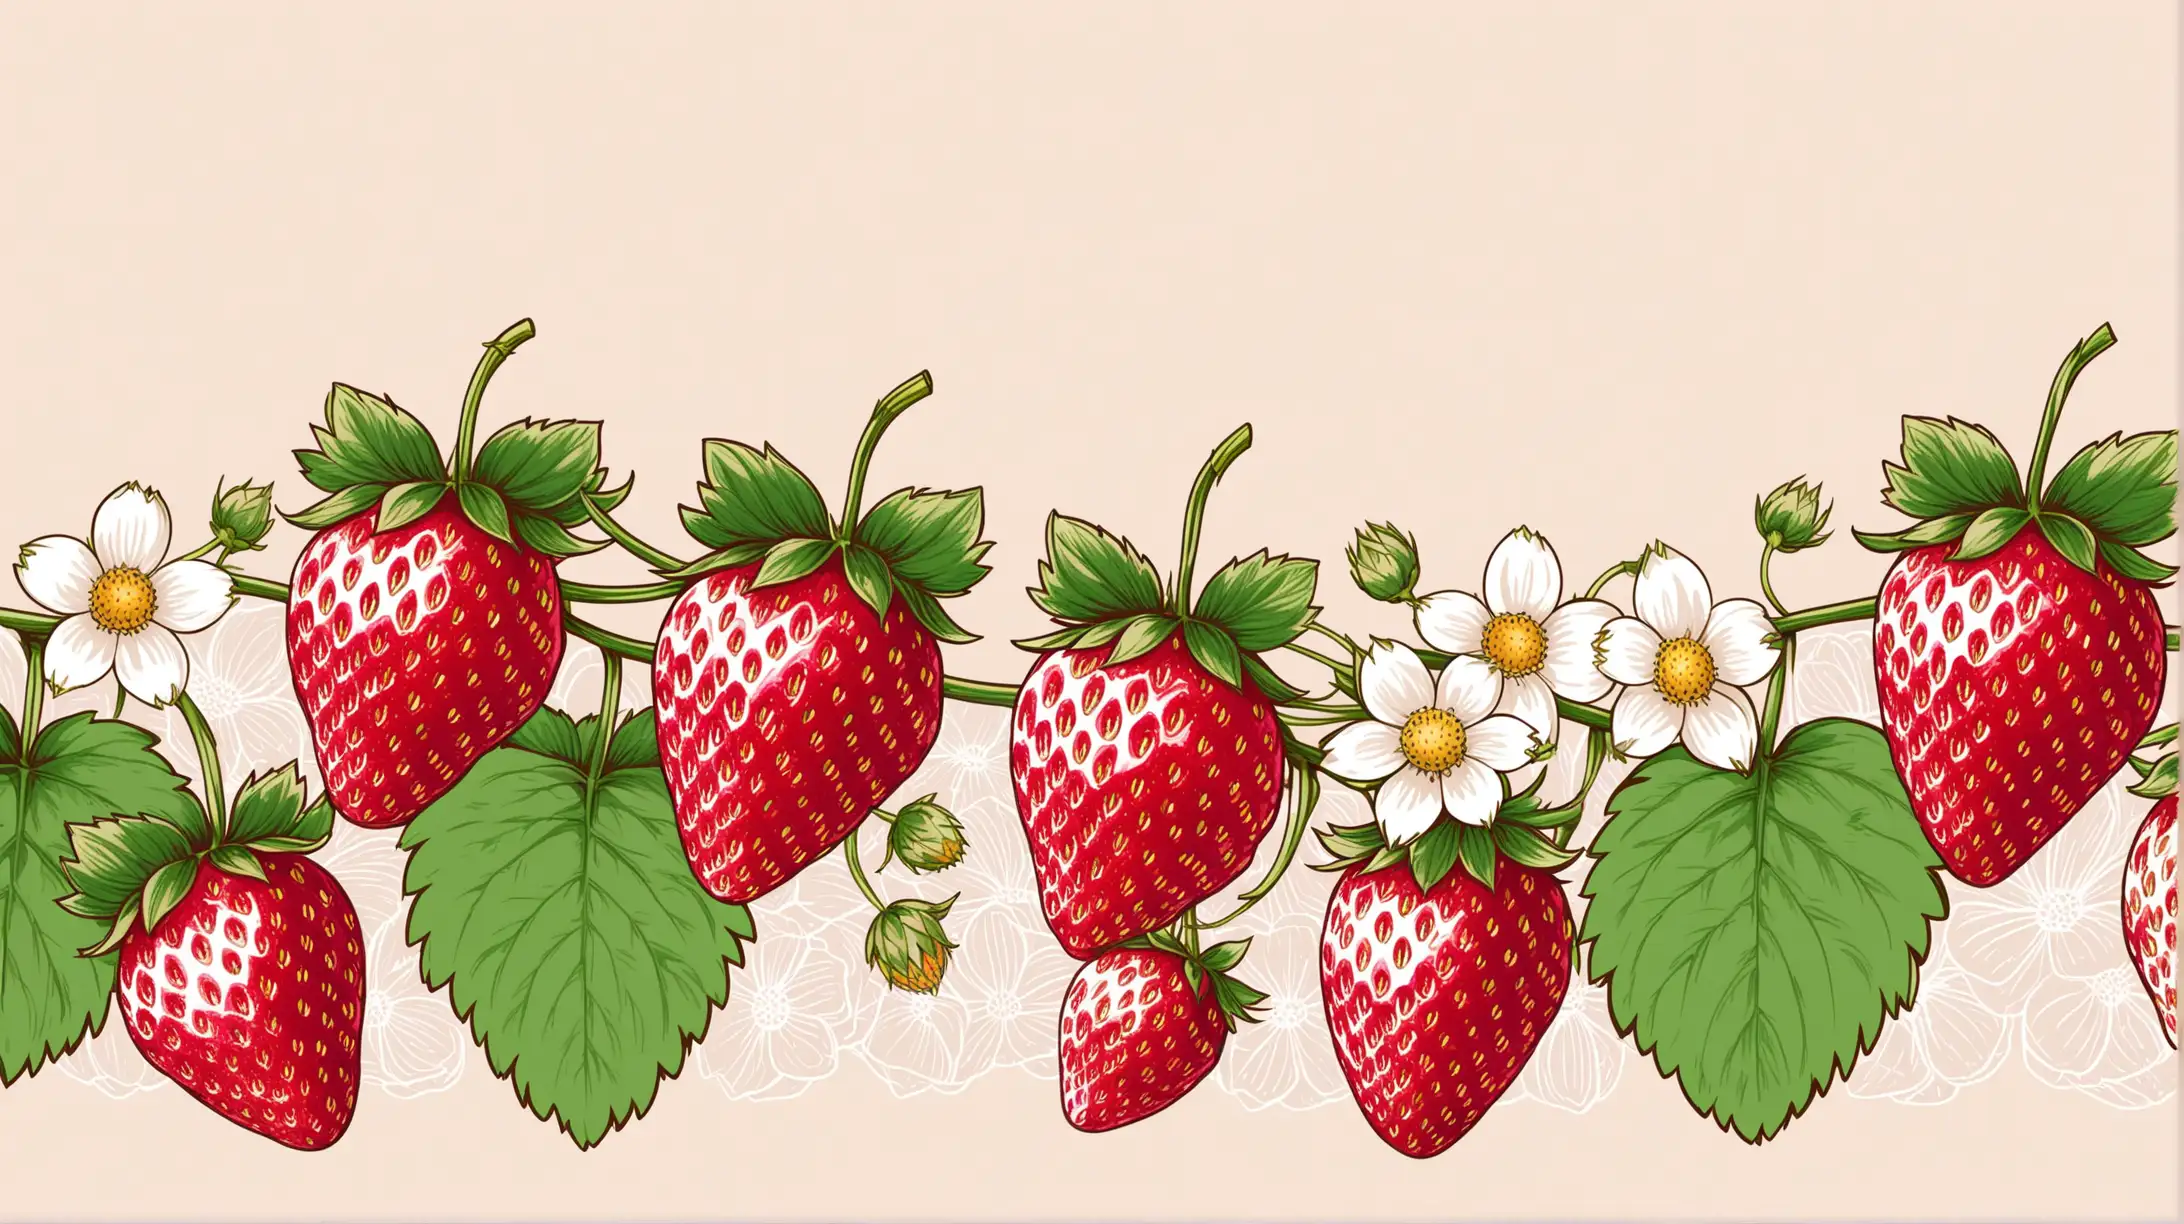 Strawberries and Flowers in Handdrawn Style